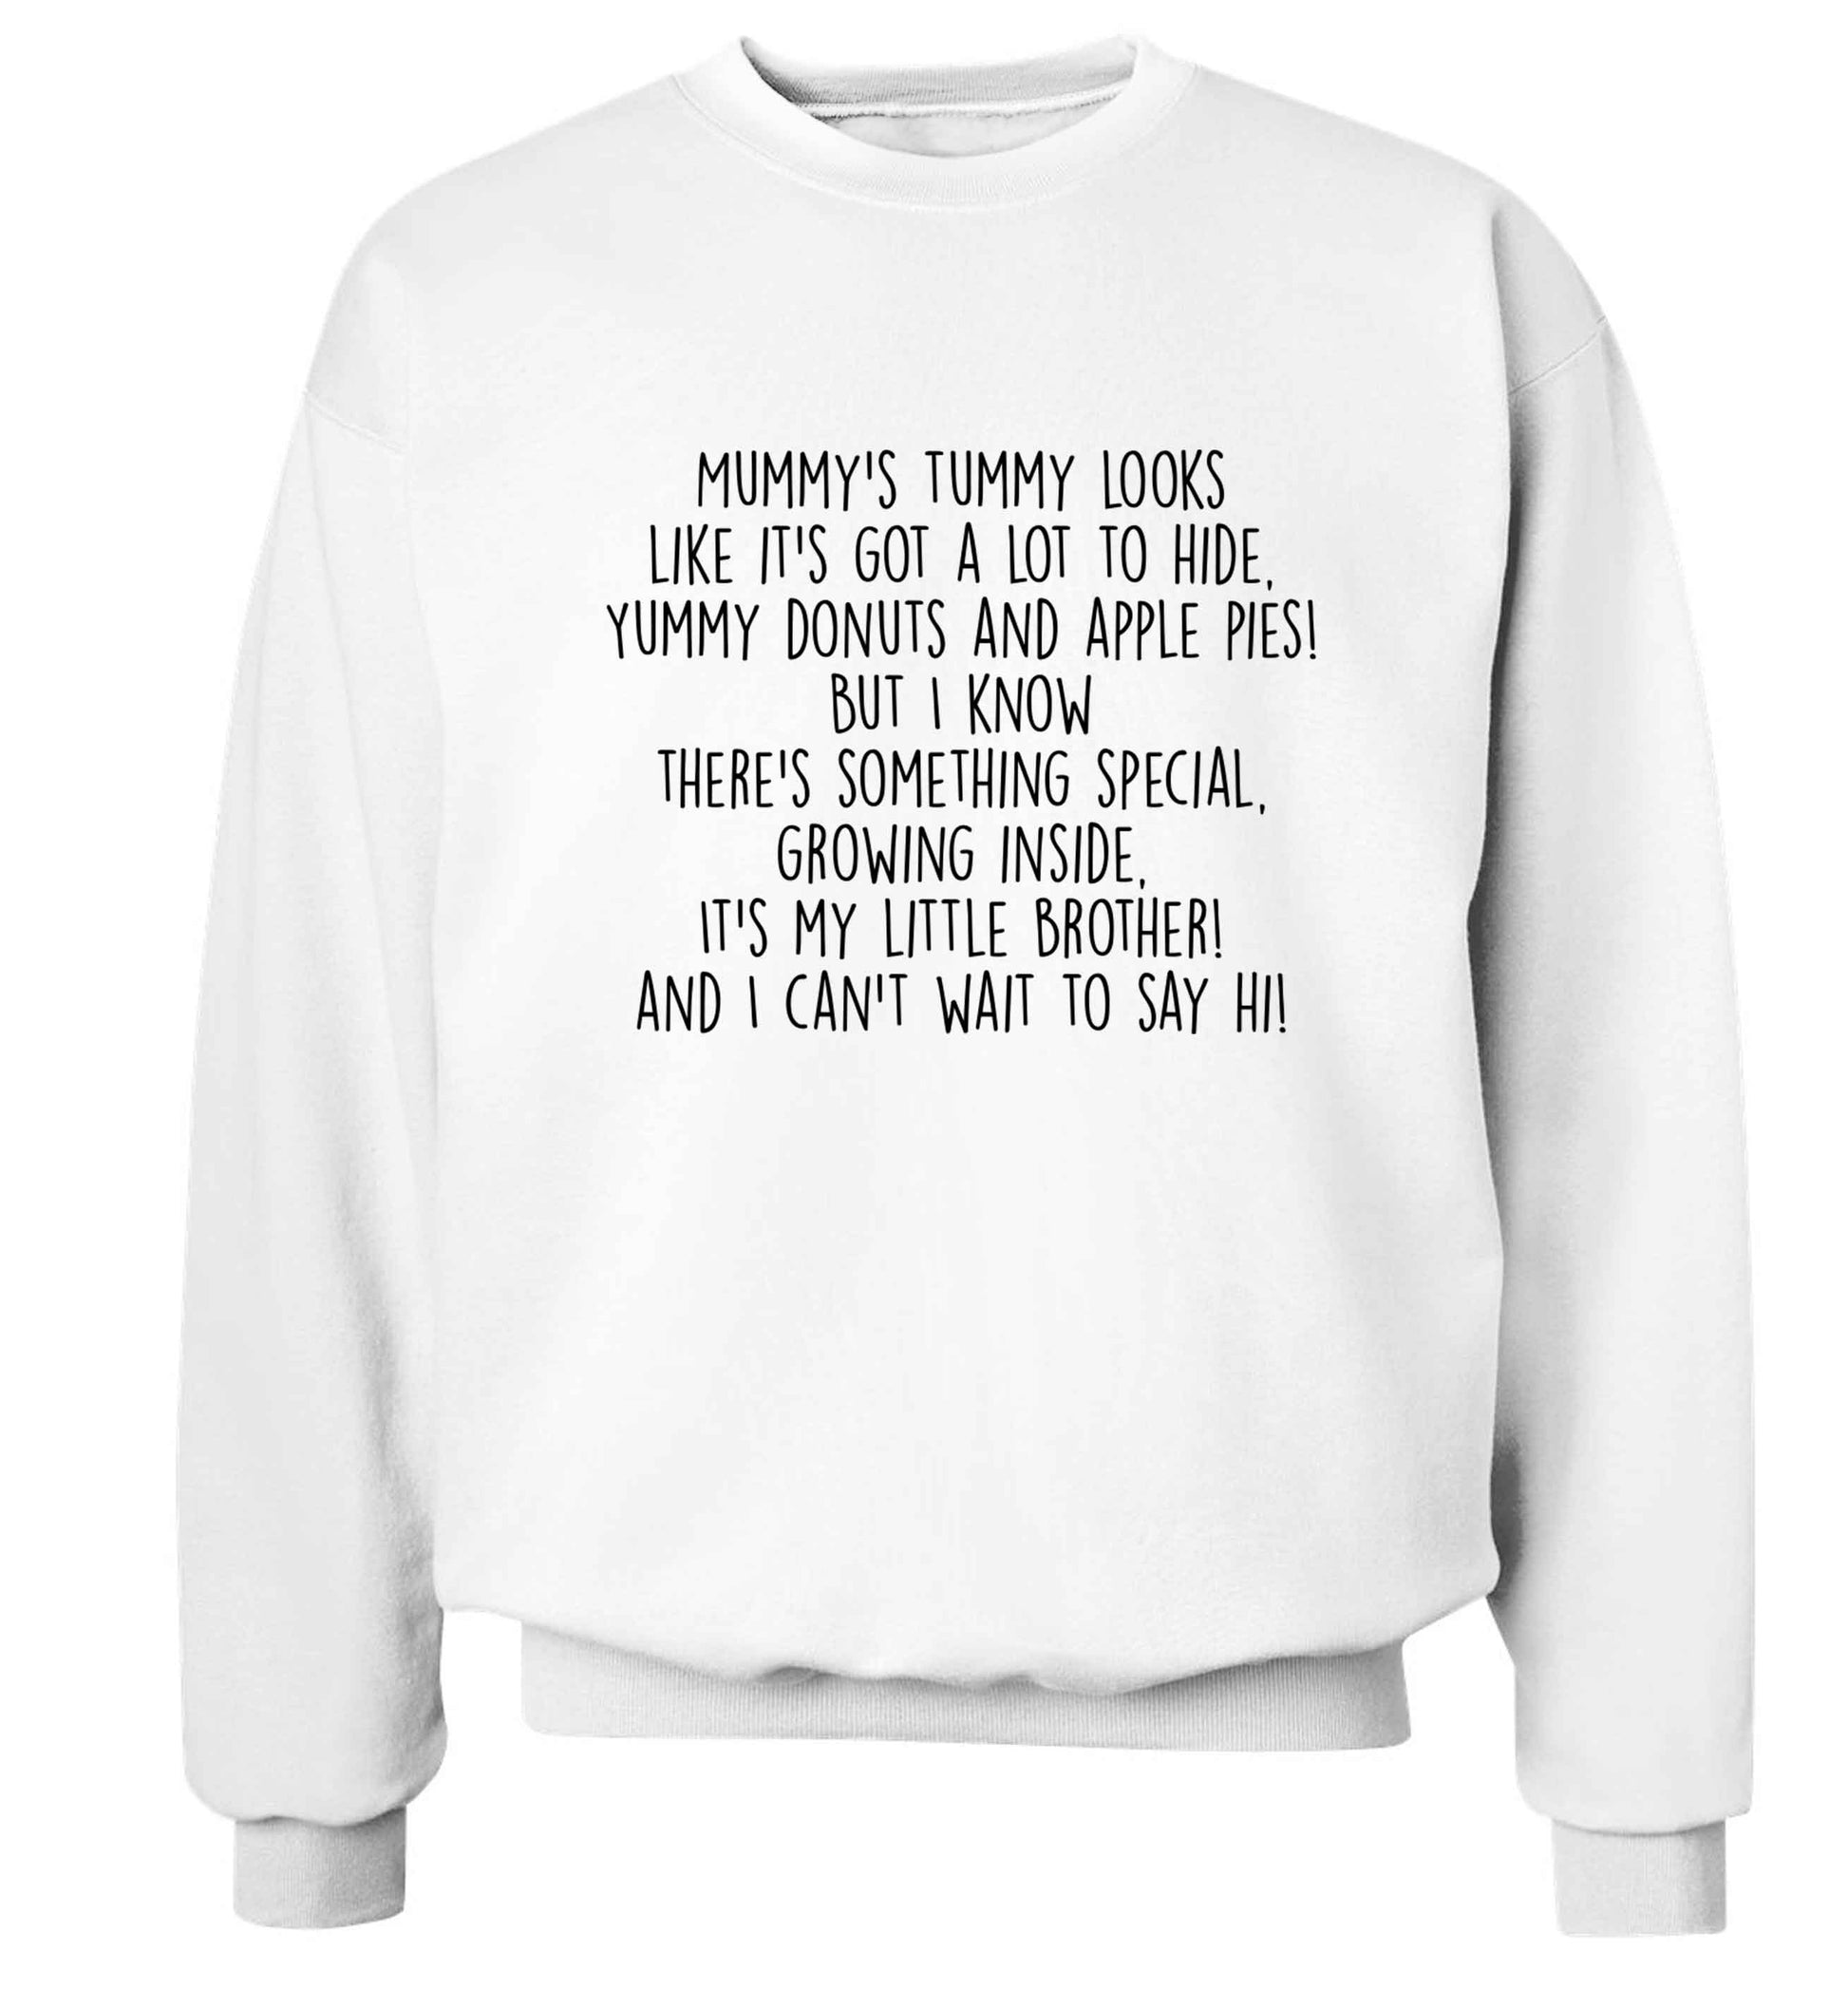 Something special growing inside it's my little brother I can't wait to say hi! Adult's unisex white Sweater 2XL